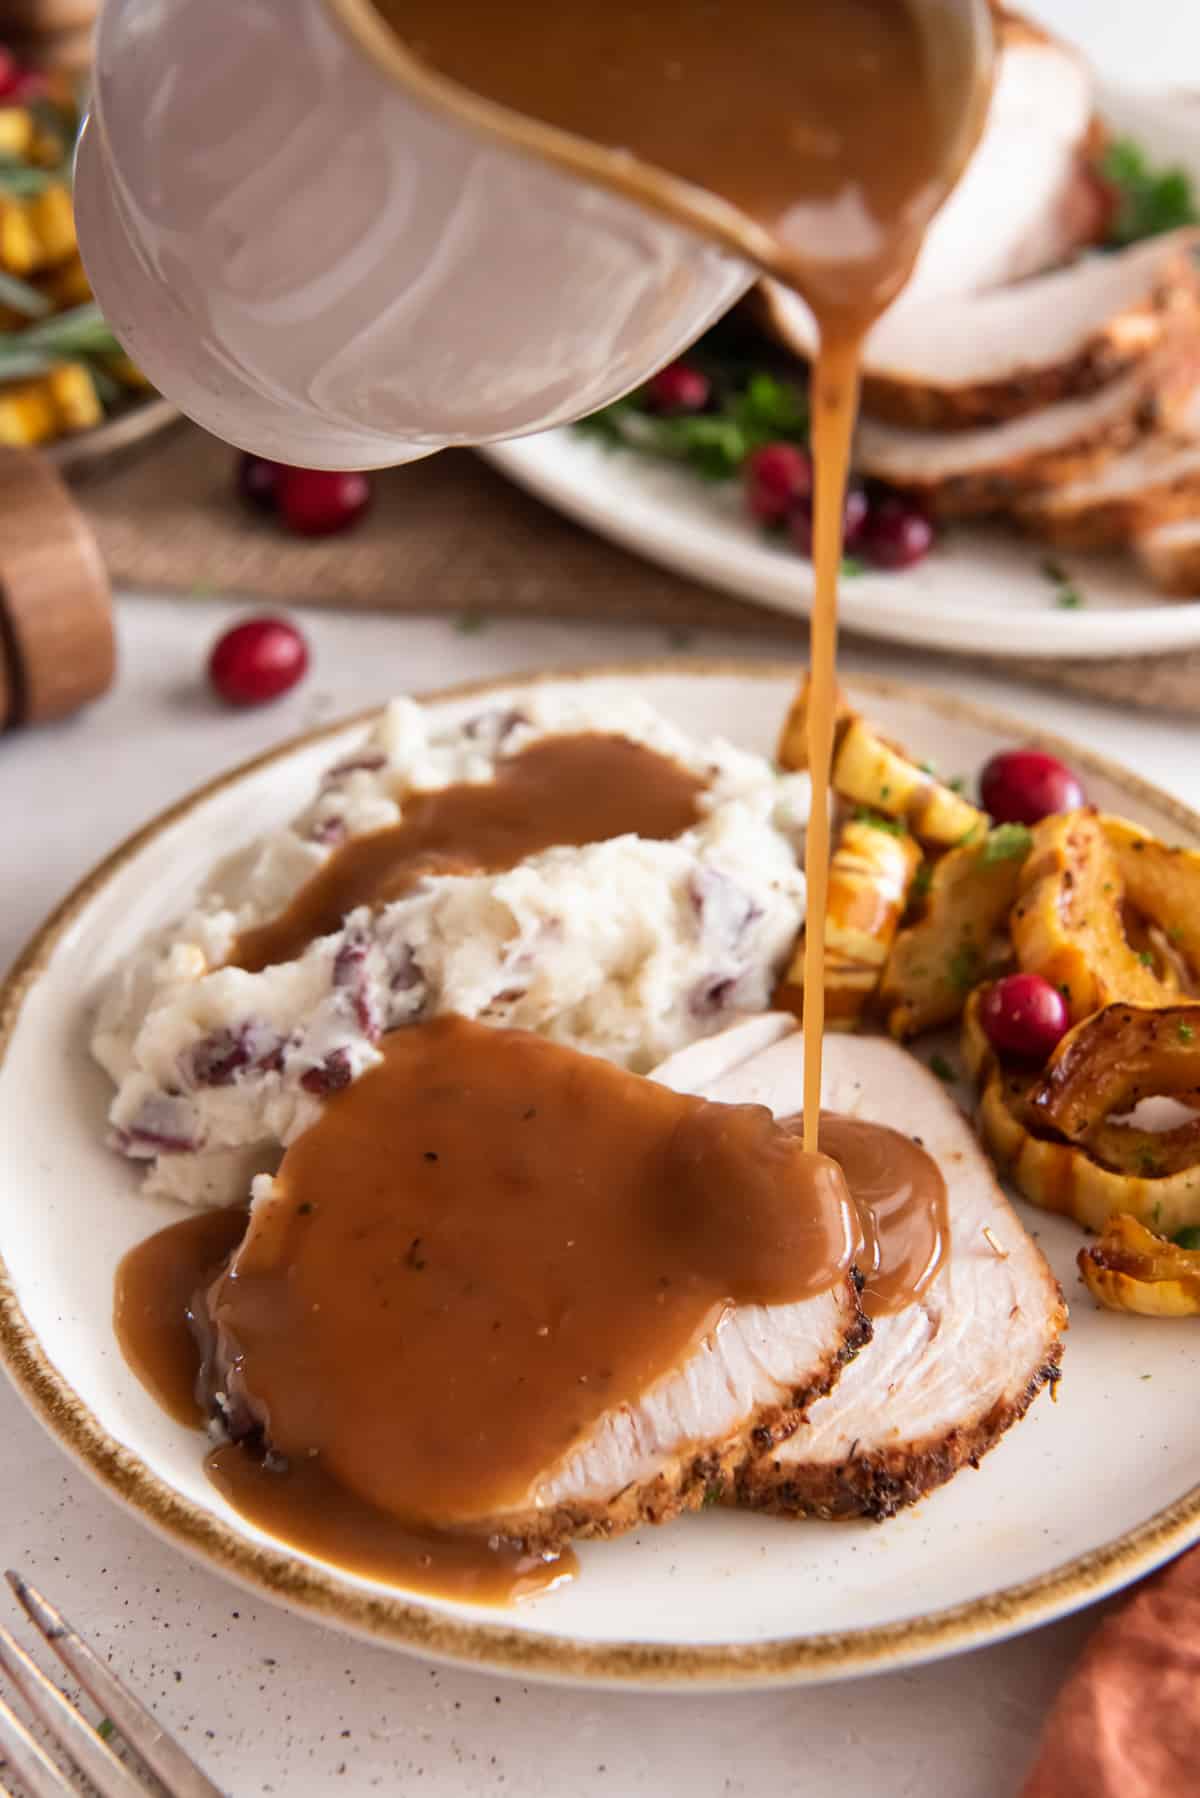 Gravy pouring on to slices of turkey breast on a white plate with mashed potatoes.